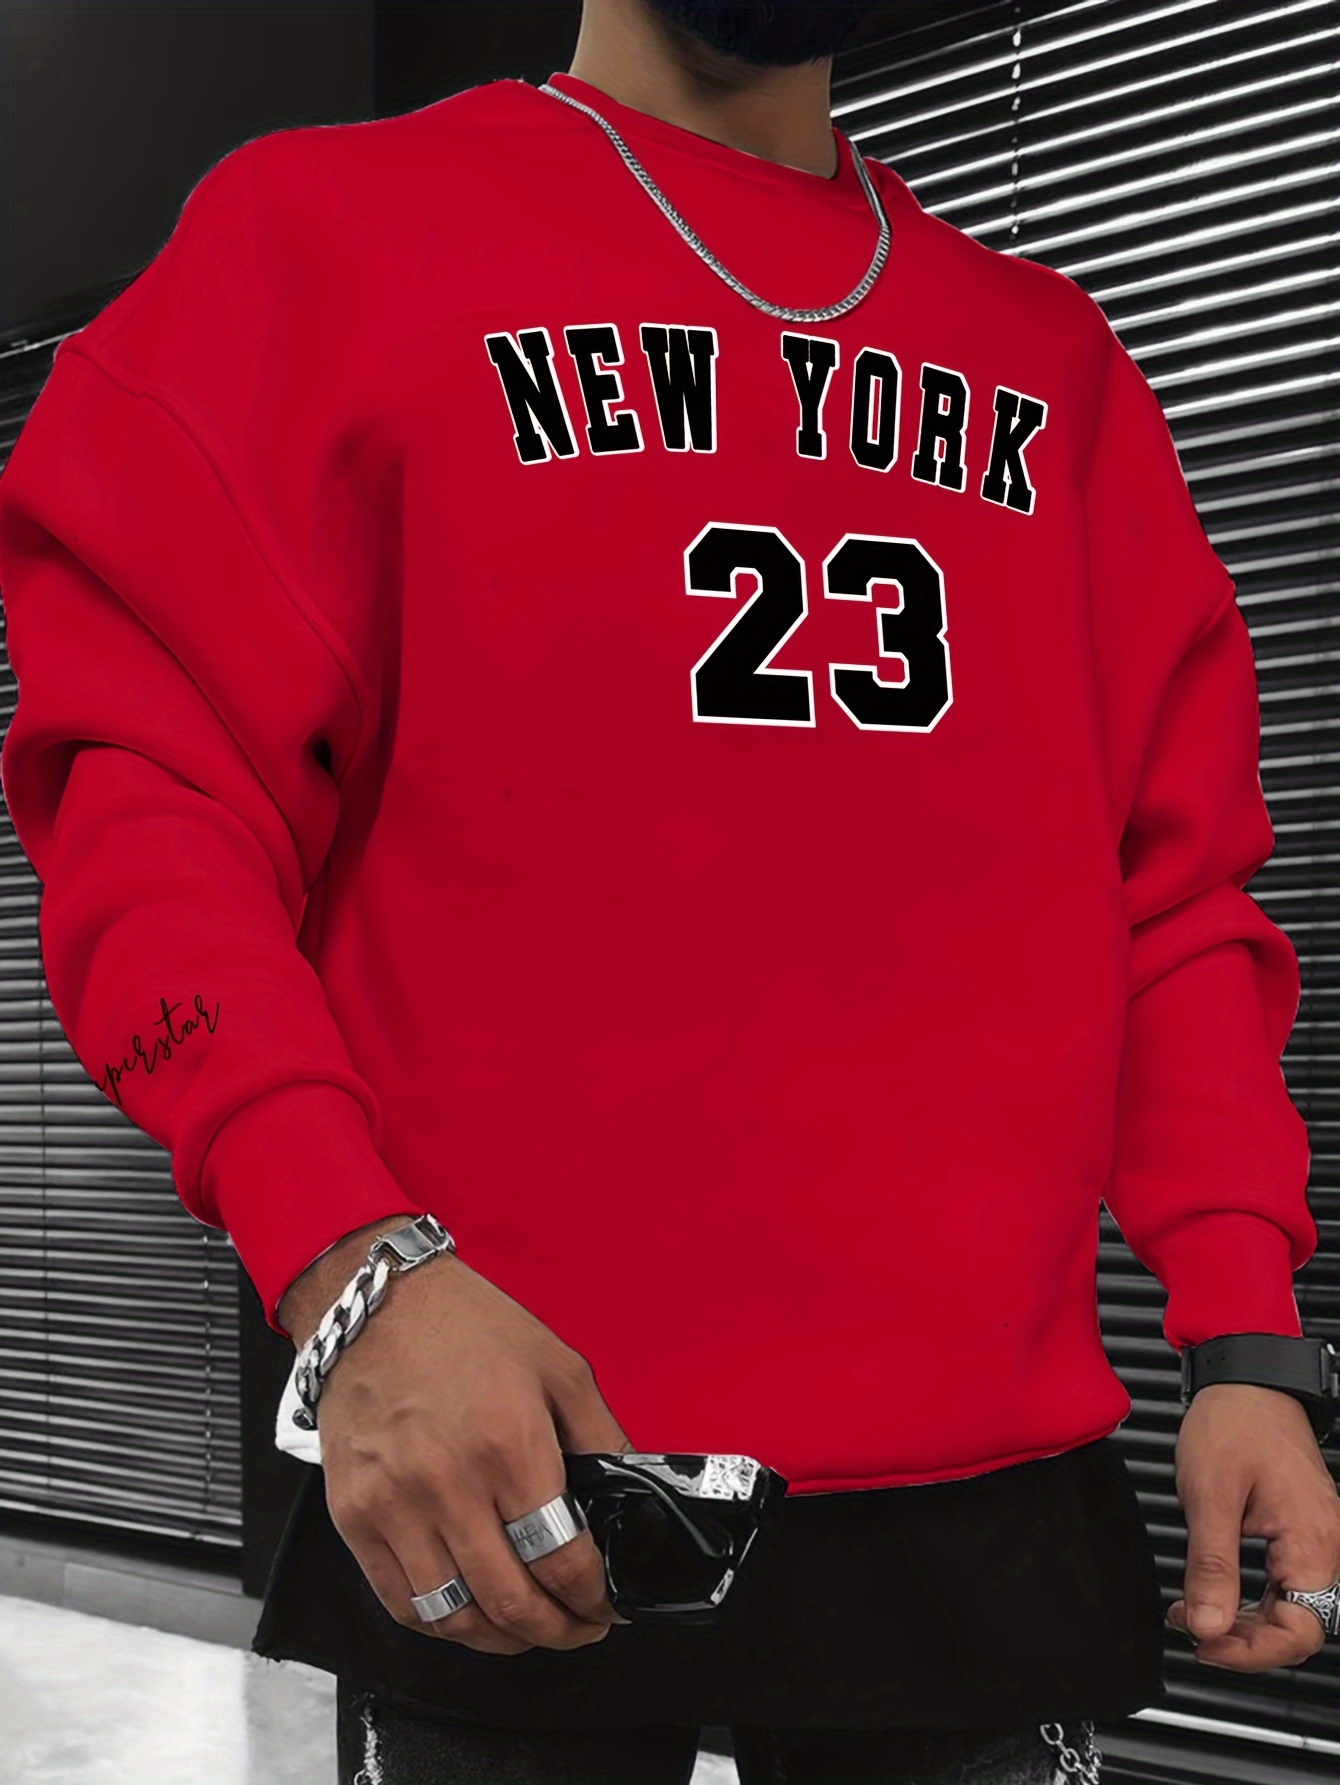 NEW YORK 23 Print Fashionable Men’s Casual Long Sleeve Crew Neck Pullover Sweatshirt, Suitable For Outdoor Sports, For Autumn Spring, Can Be Paired With Hip-hop Necklace, As Gifts